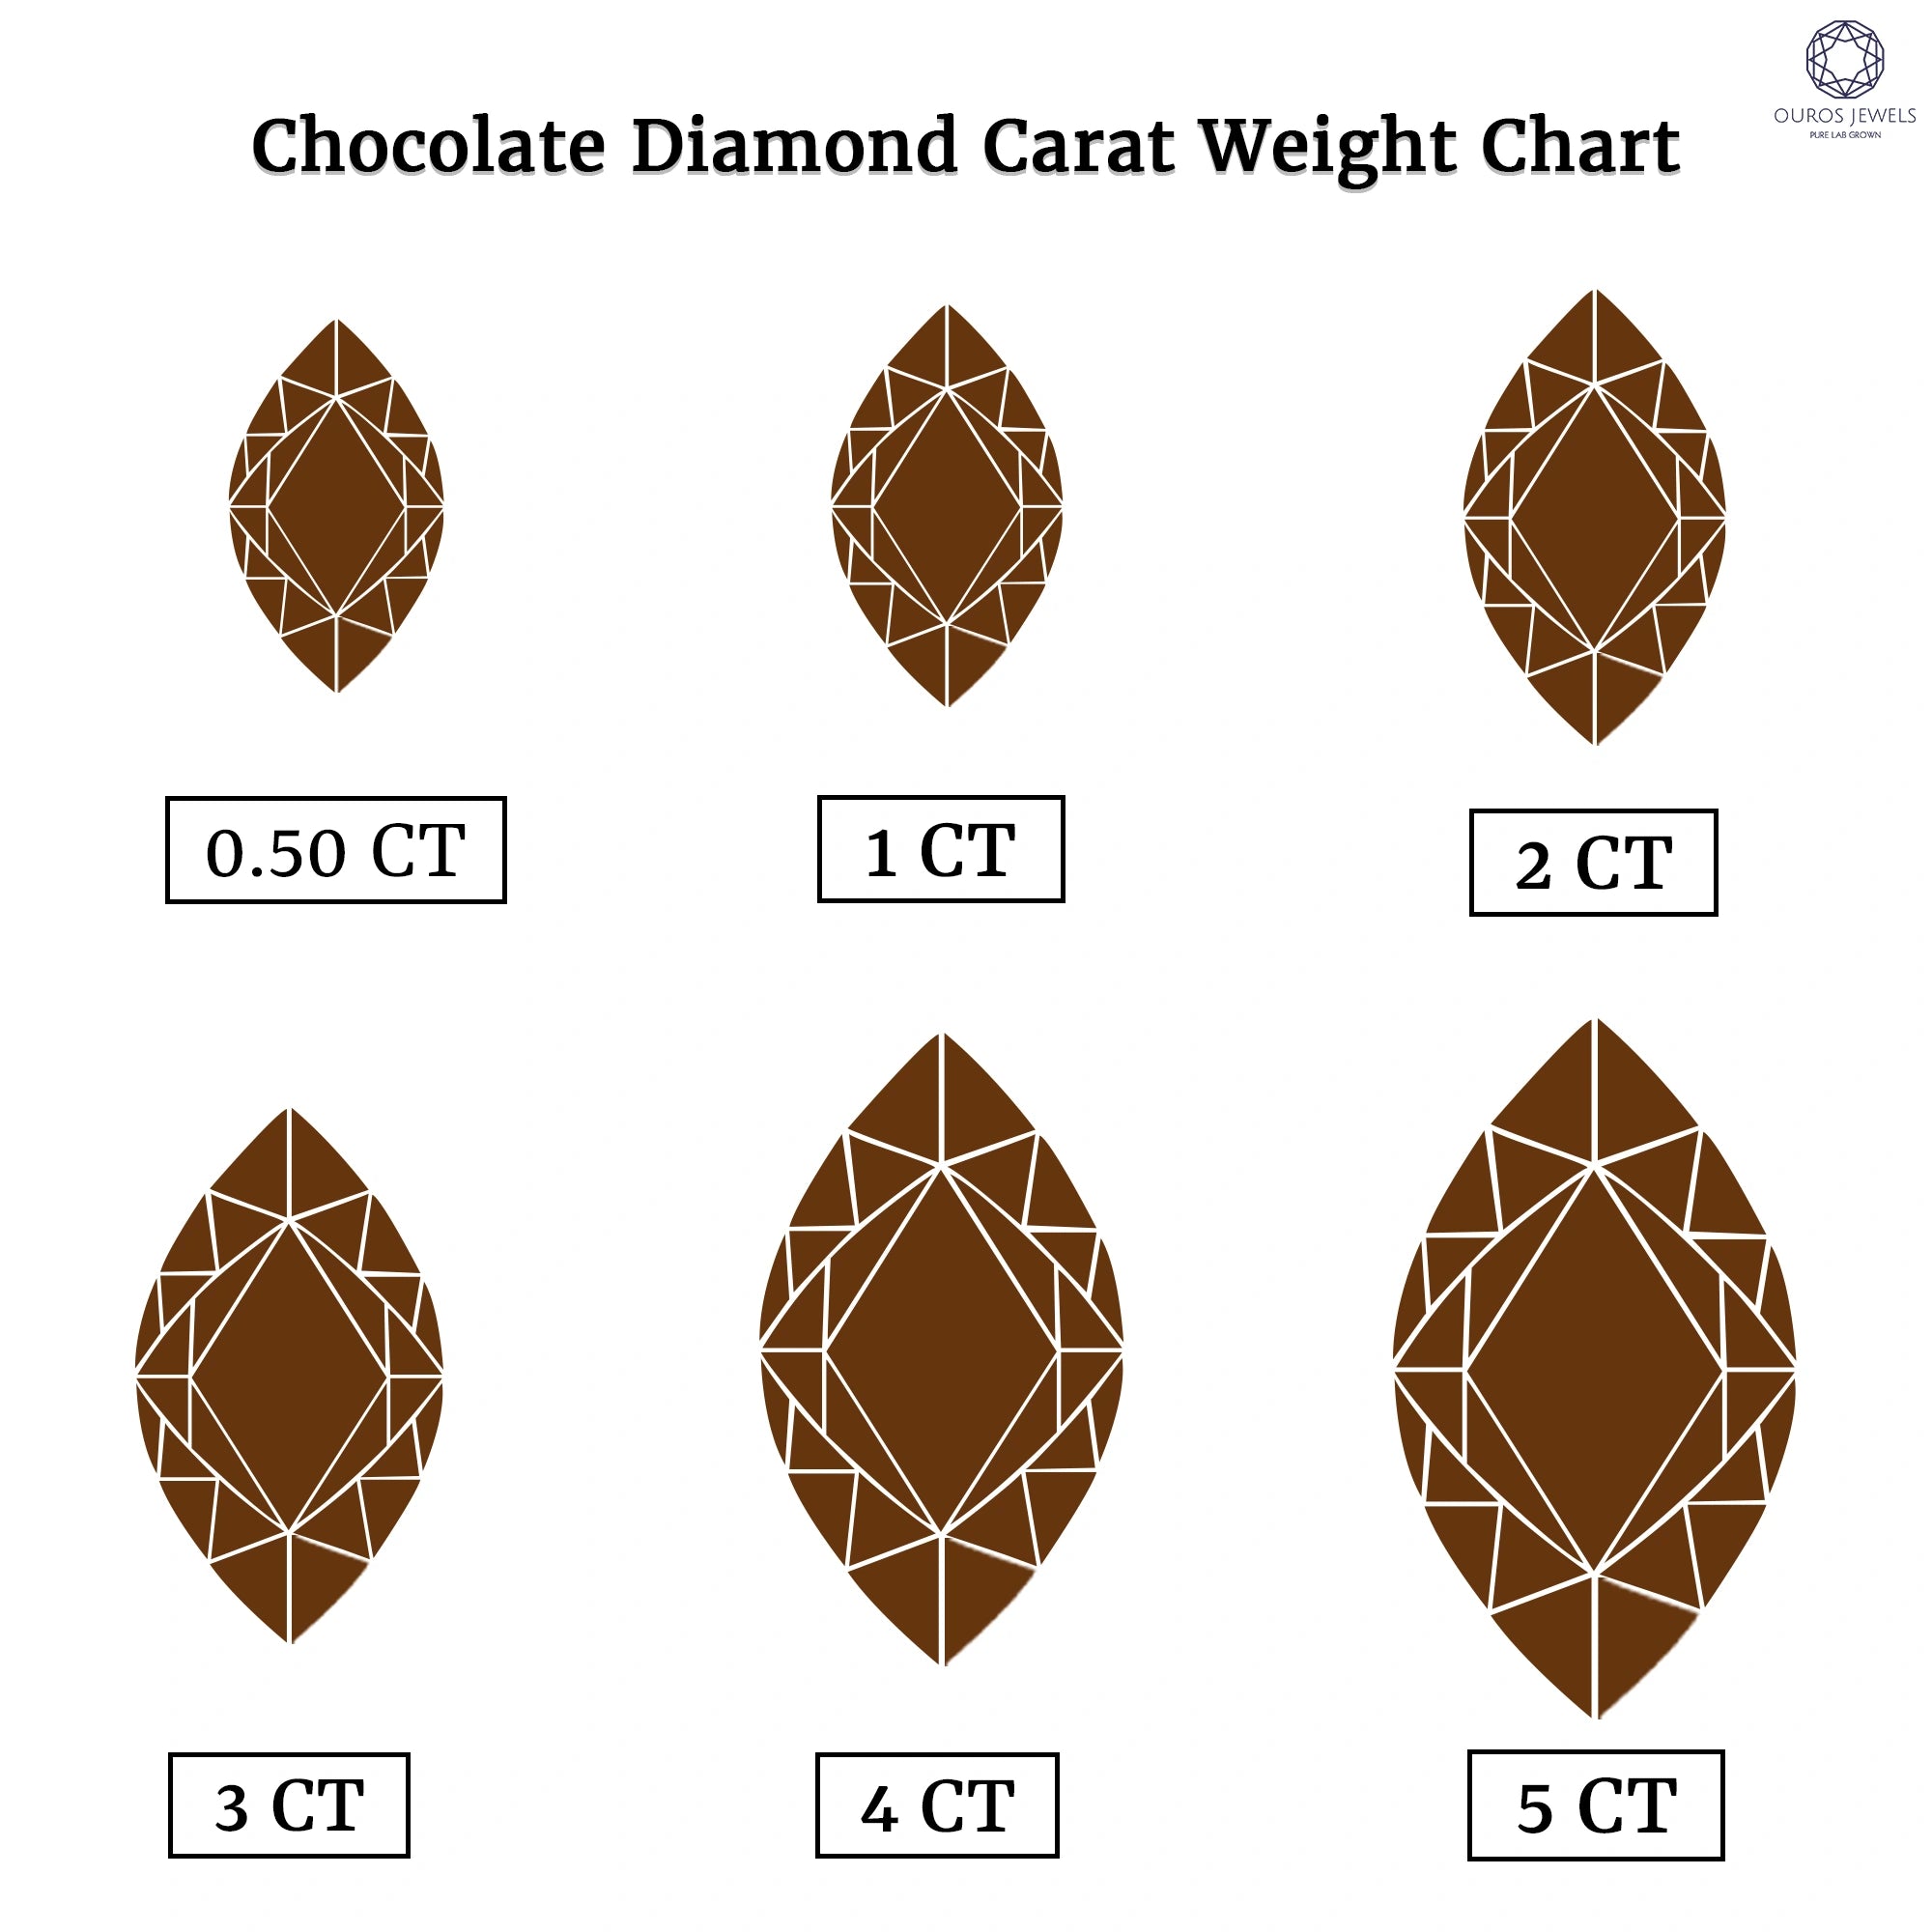 Chocolate diamond carat weights chart ranging from 0.50 to 5.00 CT